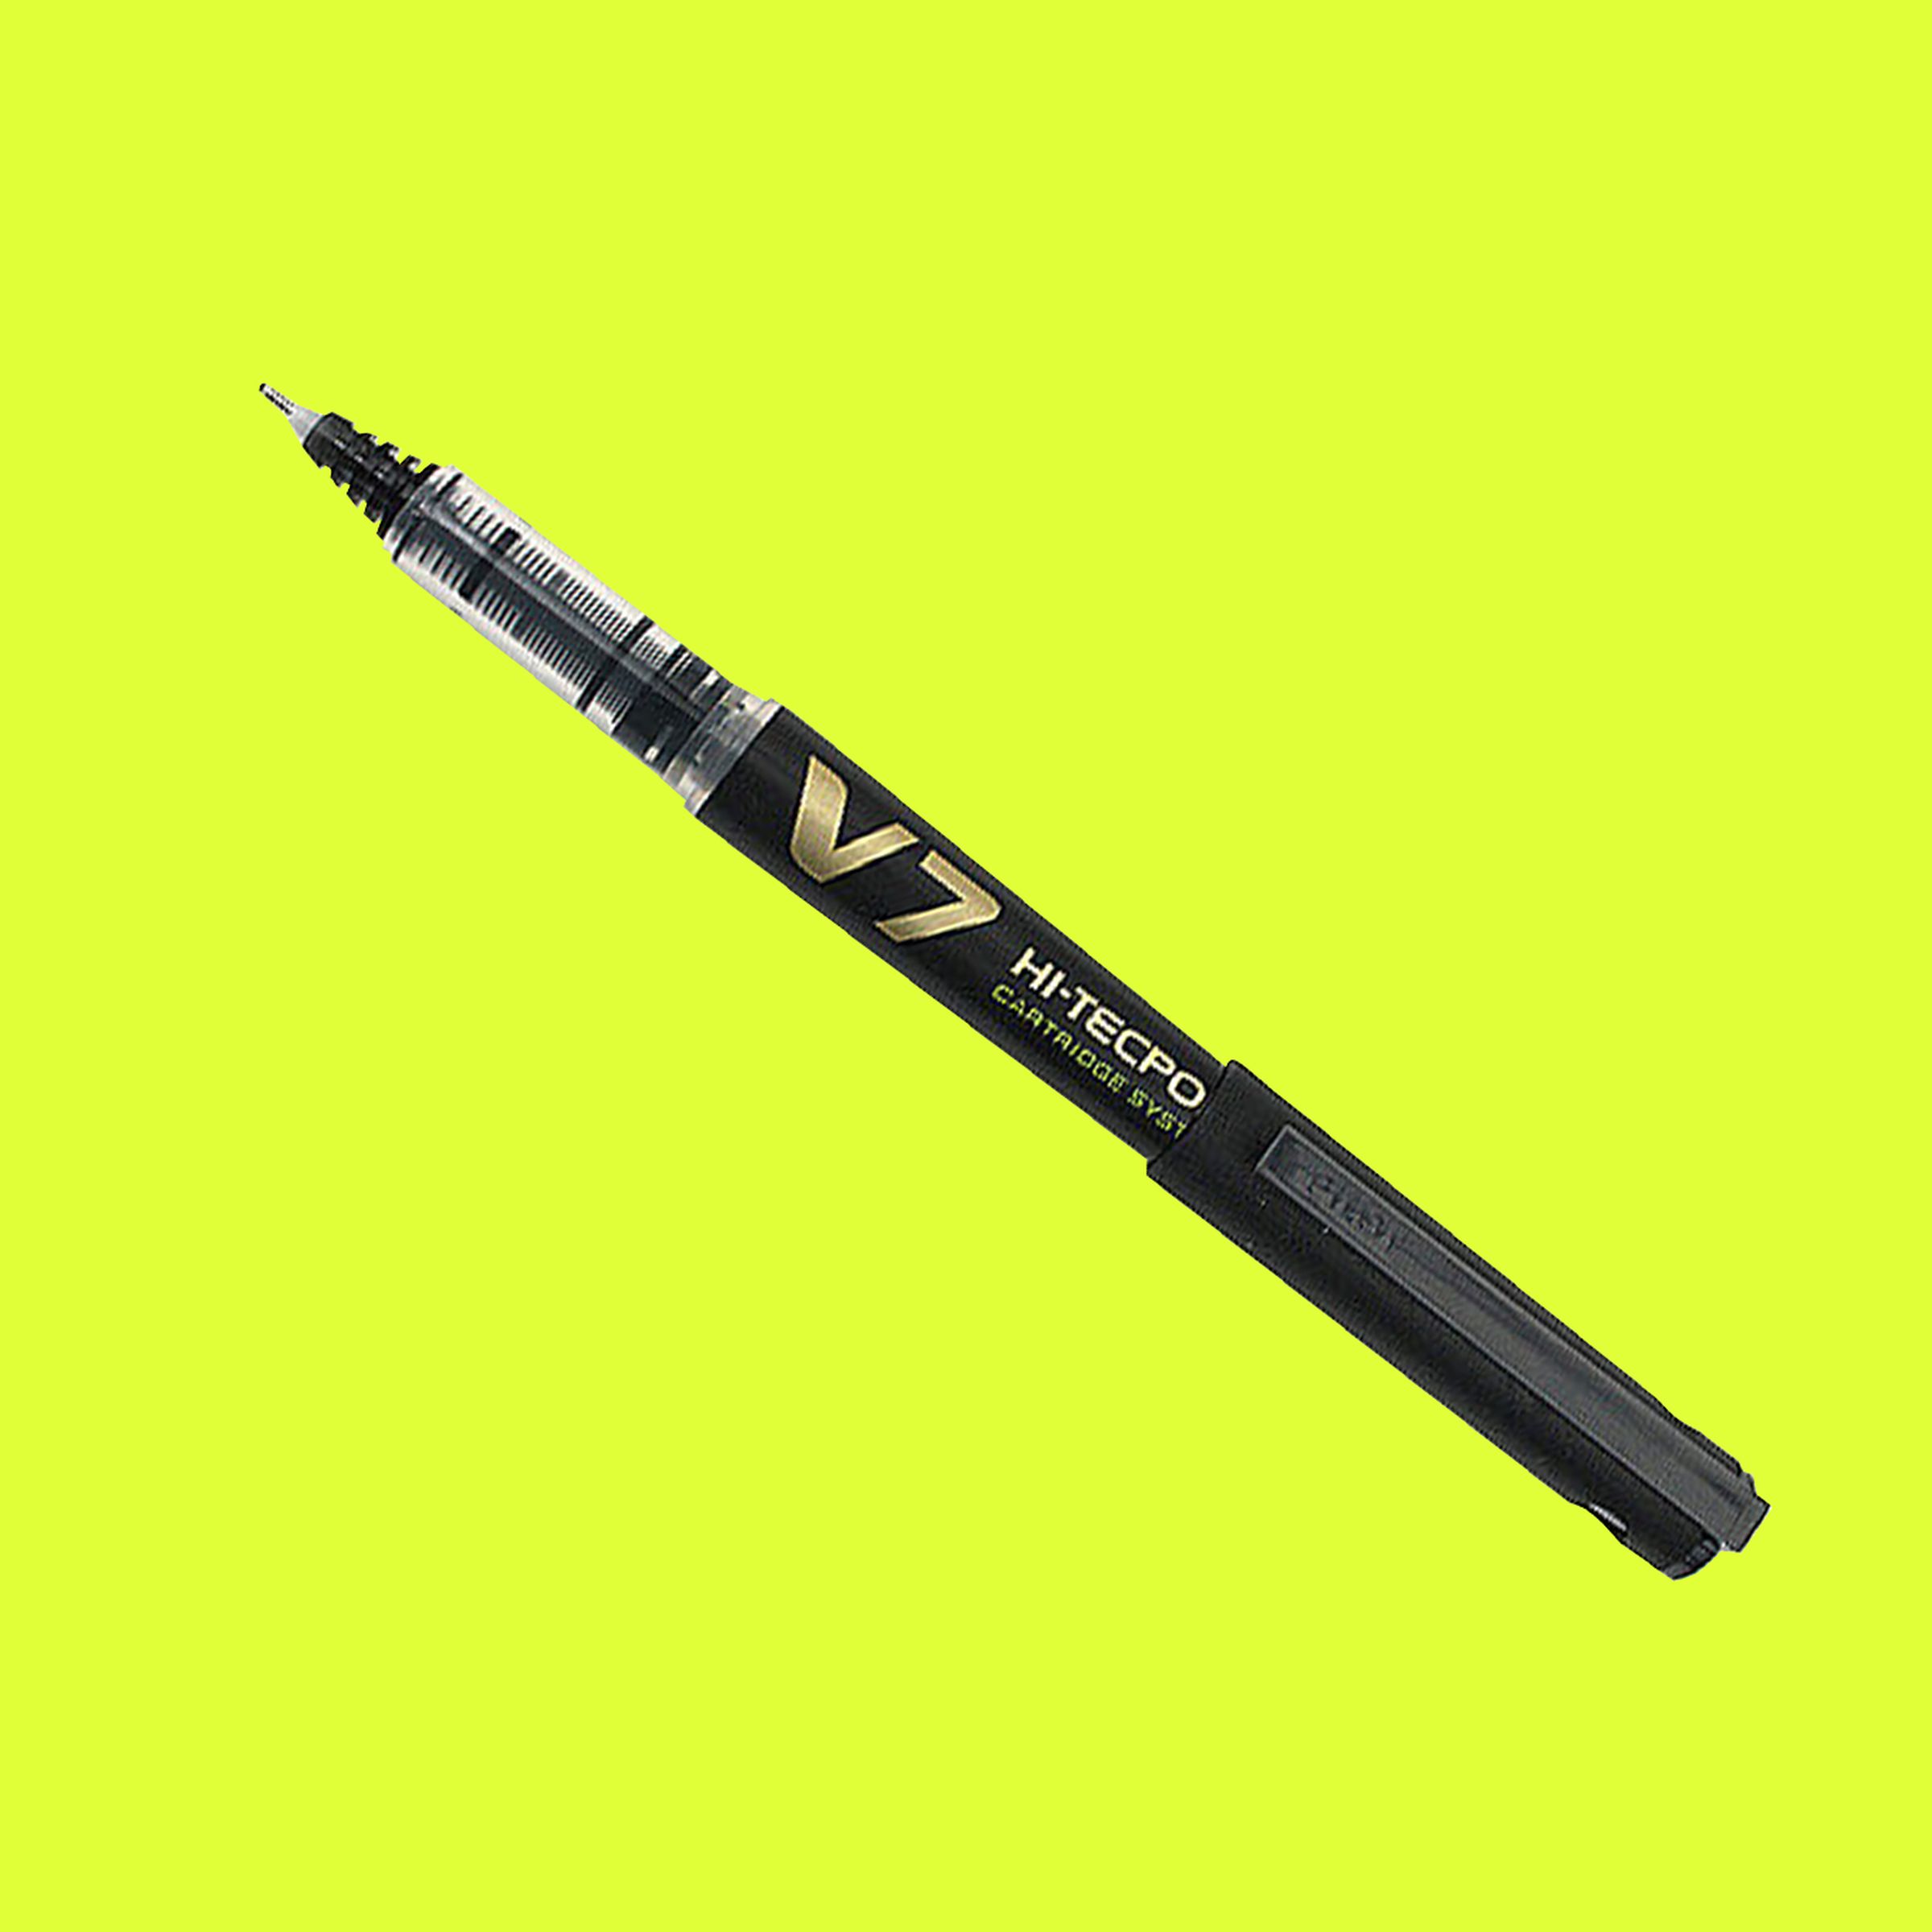 Image of a Pilot refillable pen on a yellow background.